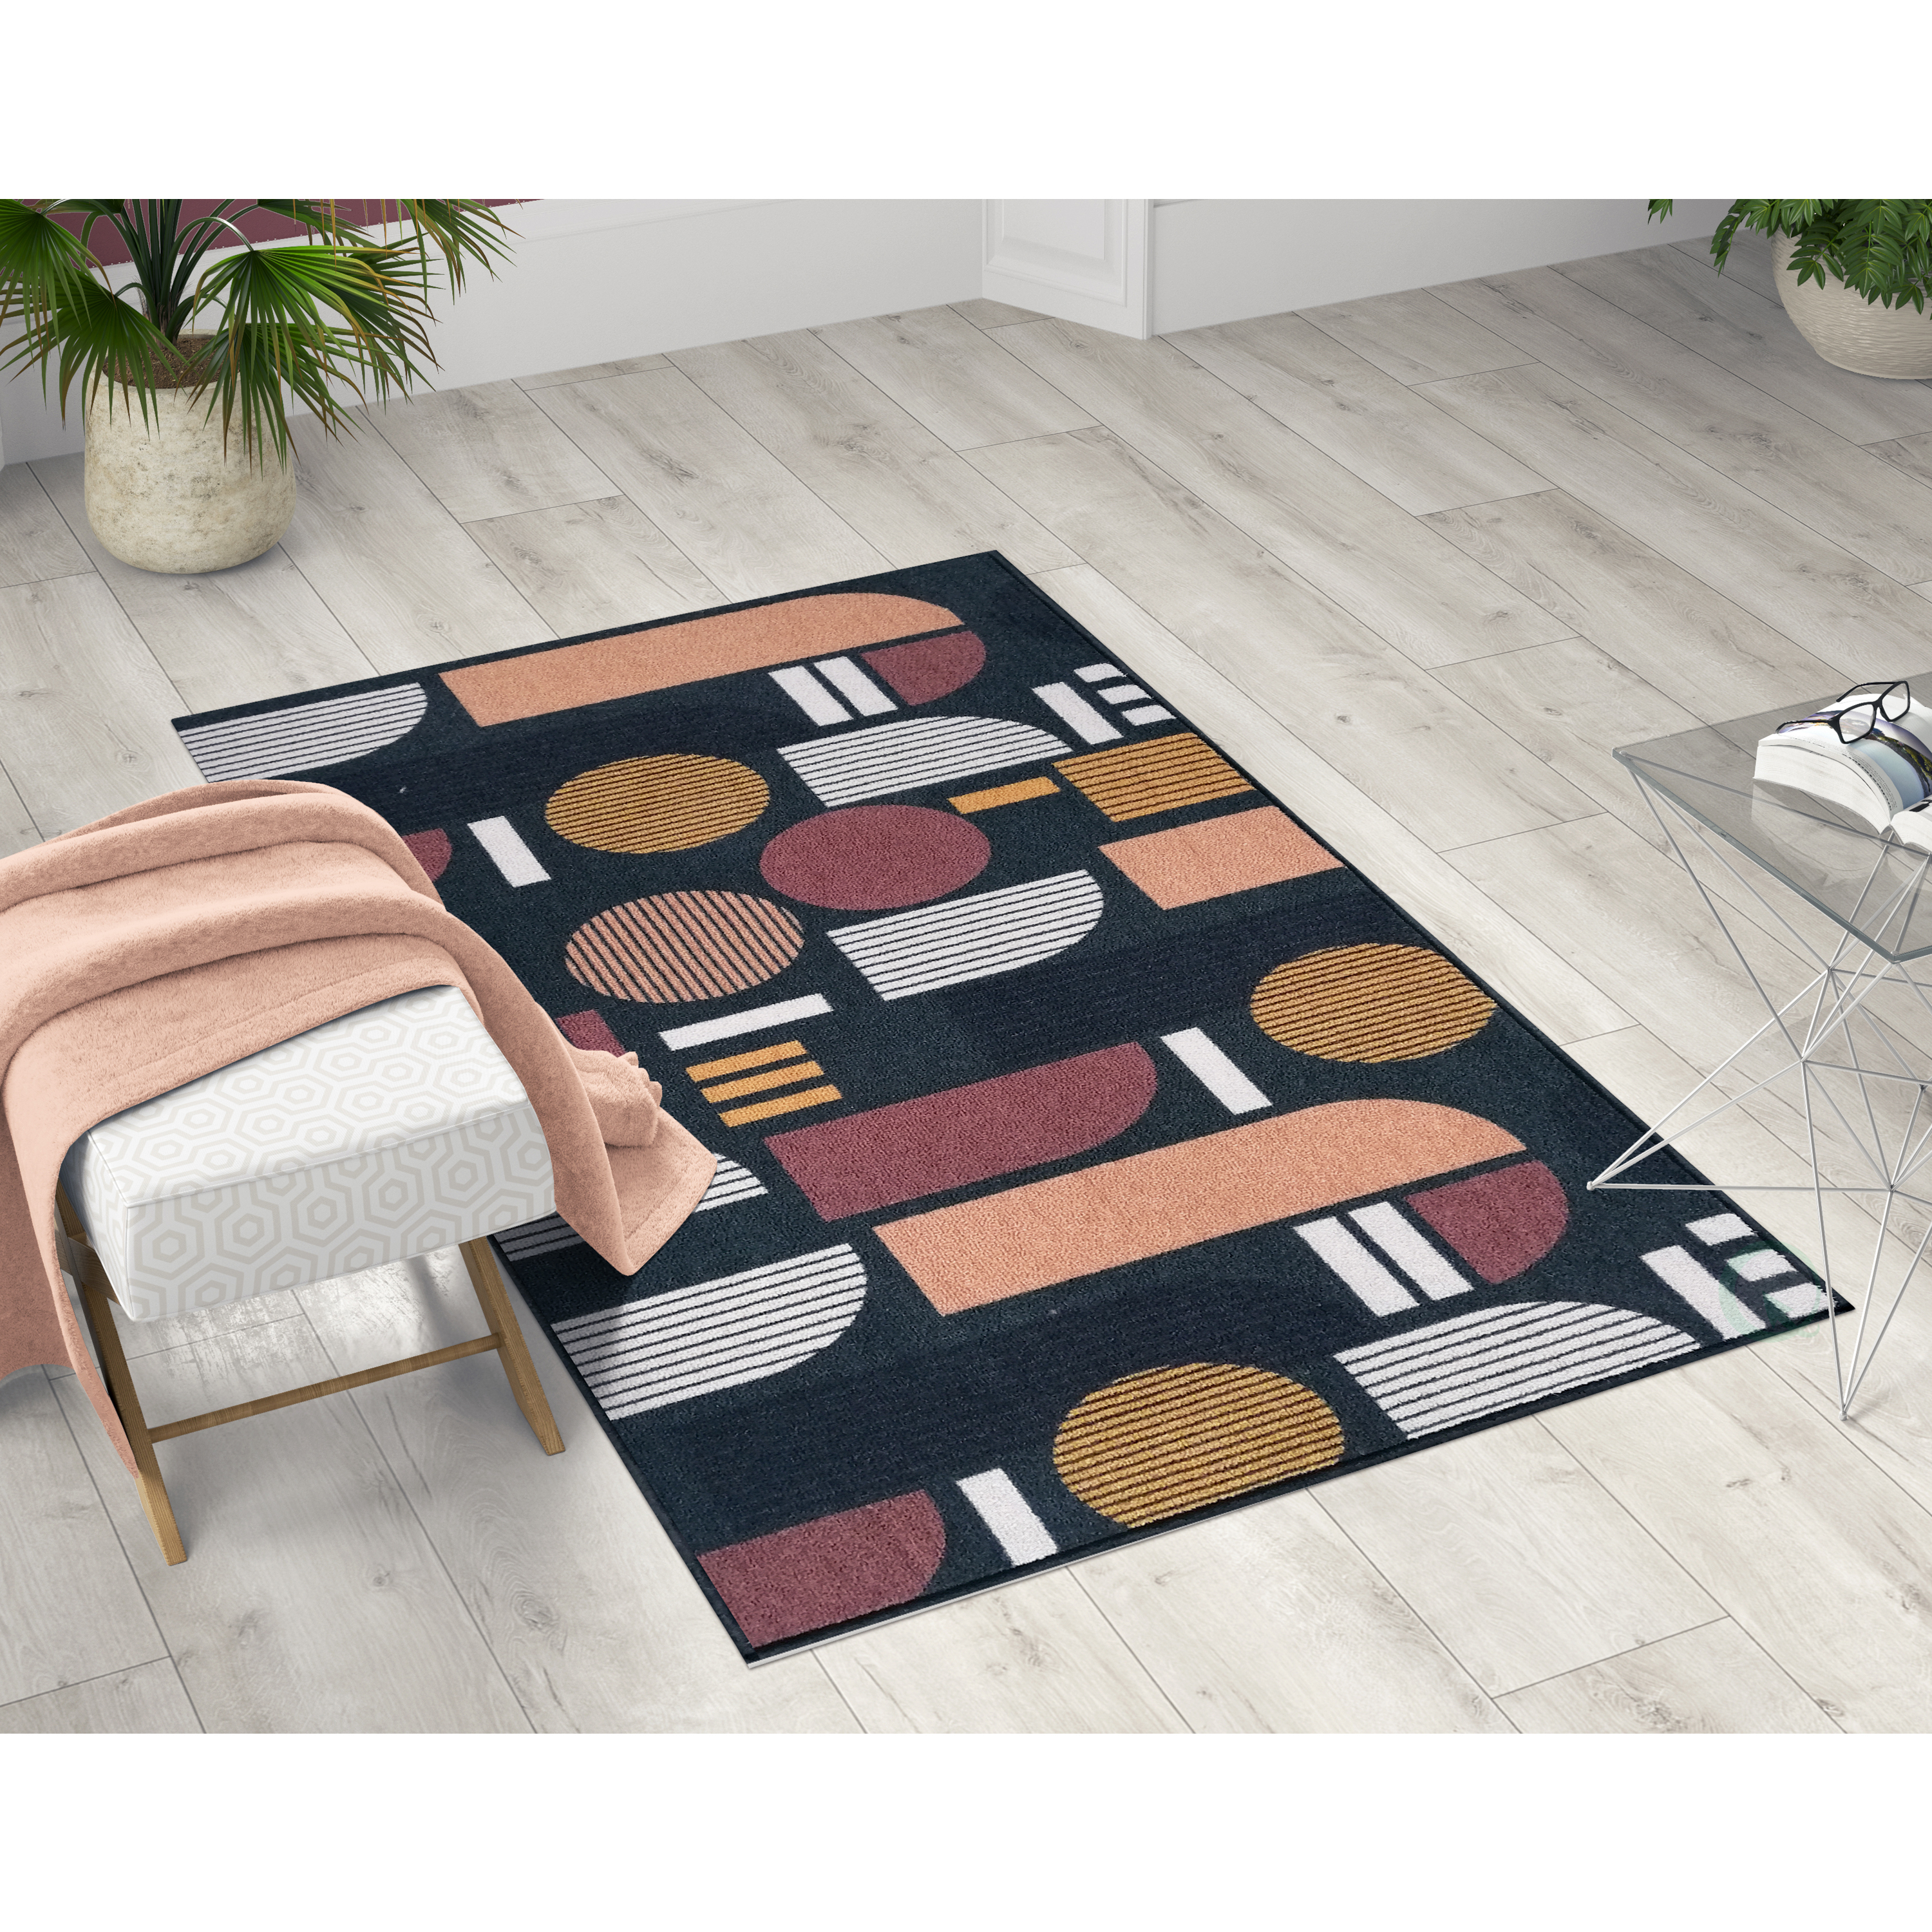 Deerlux Modern Living Room Area Rug With Nonslip Backing, Abstract Geo Pattern - 3x5